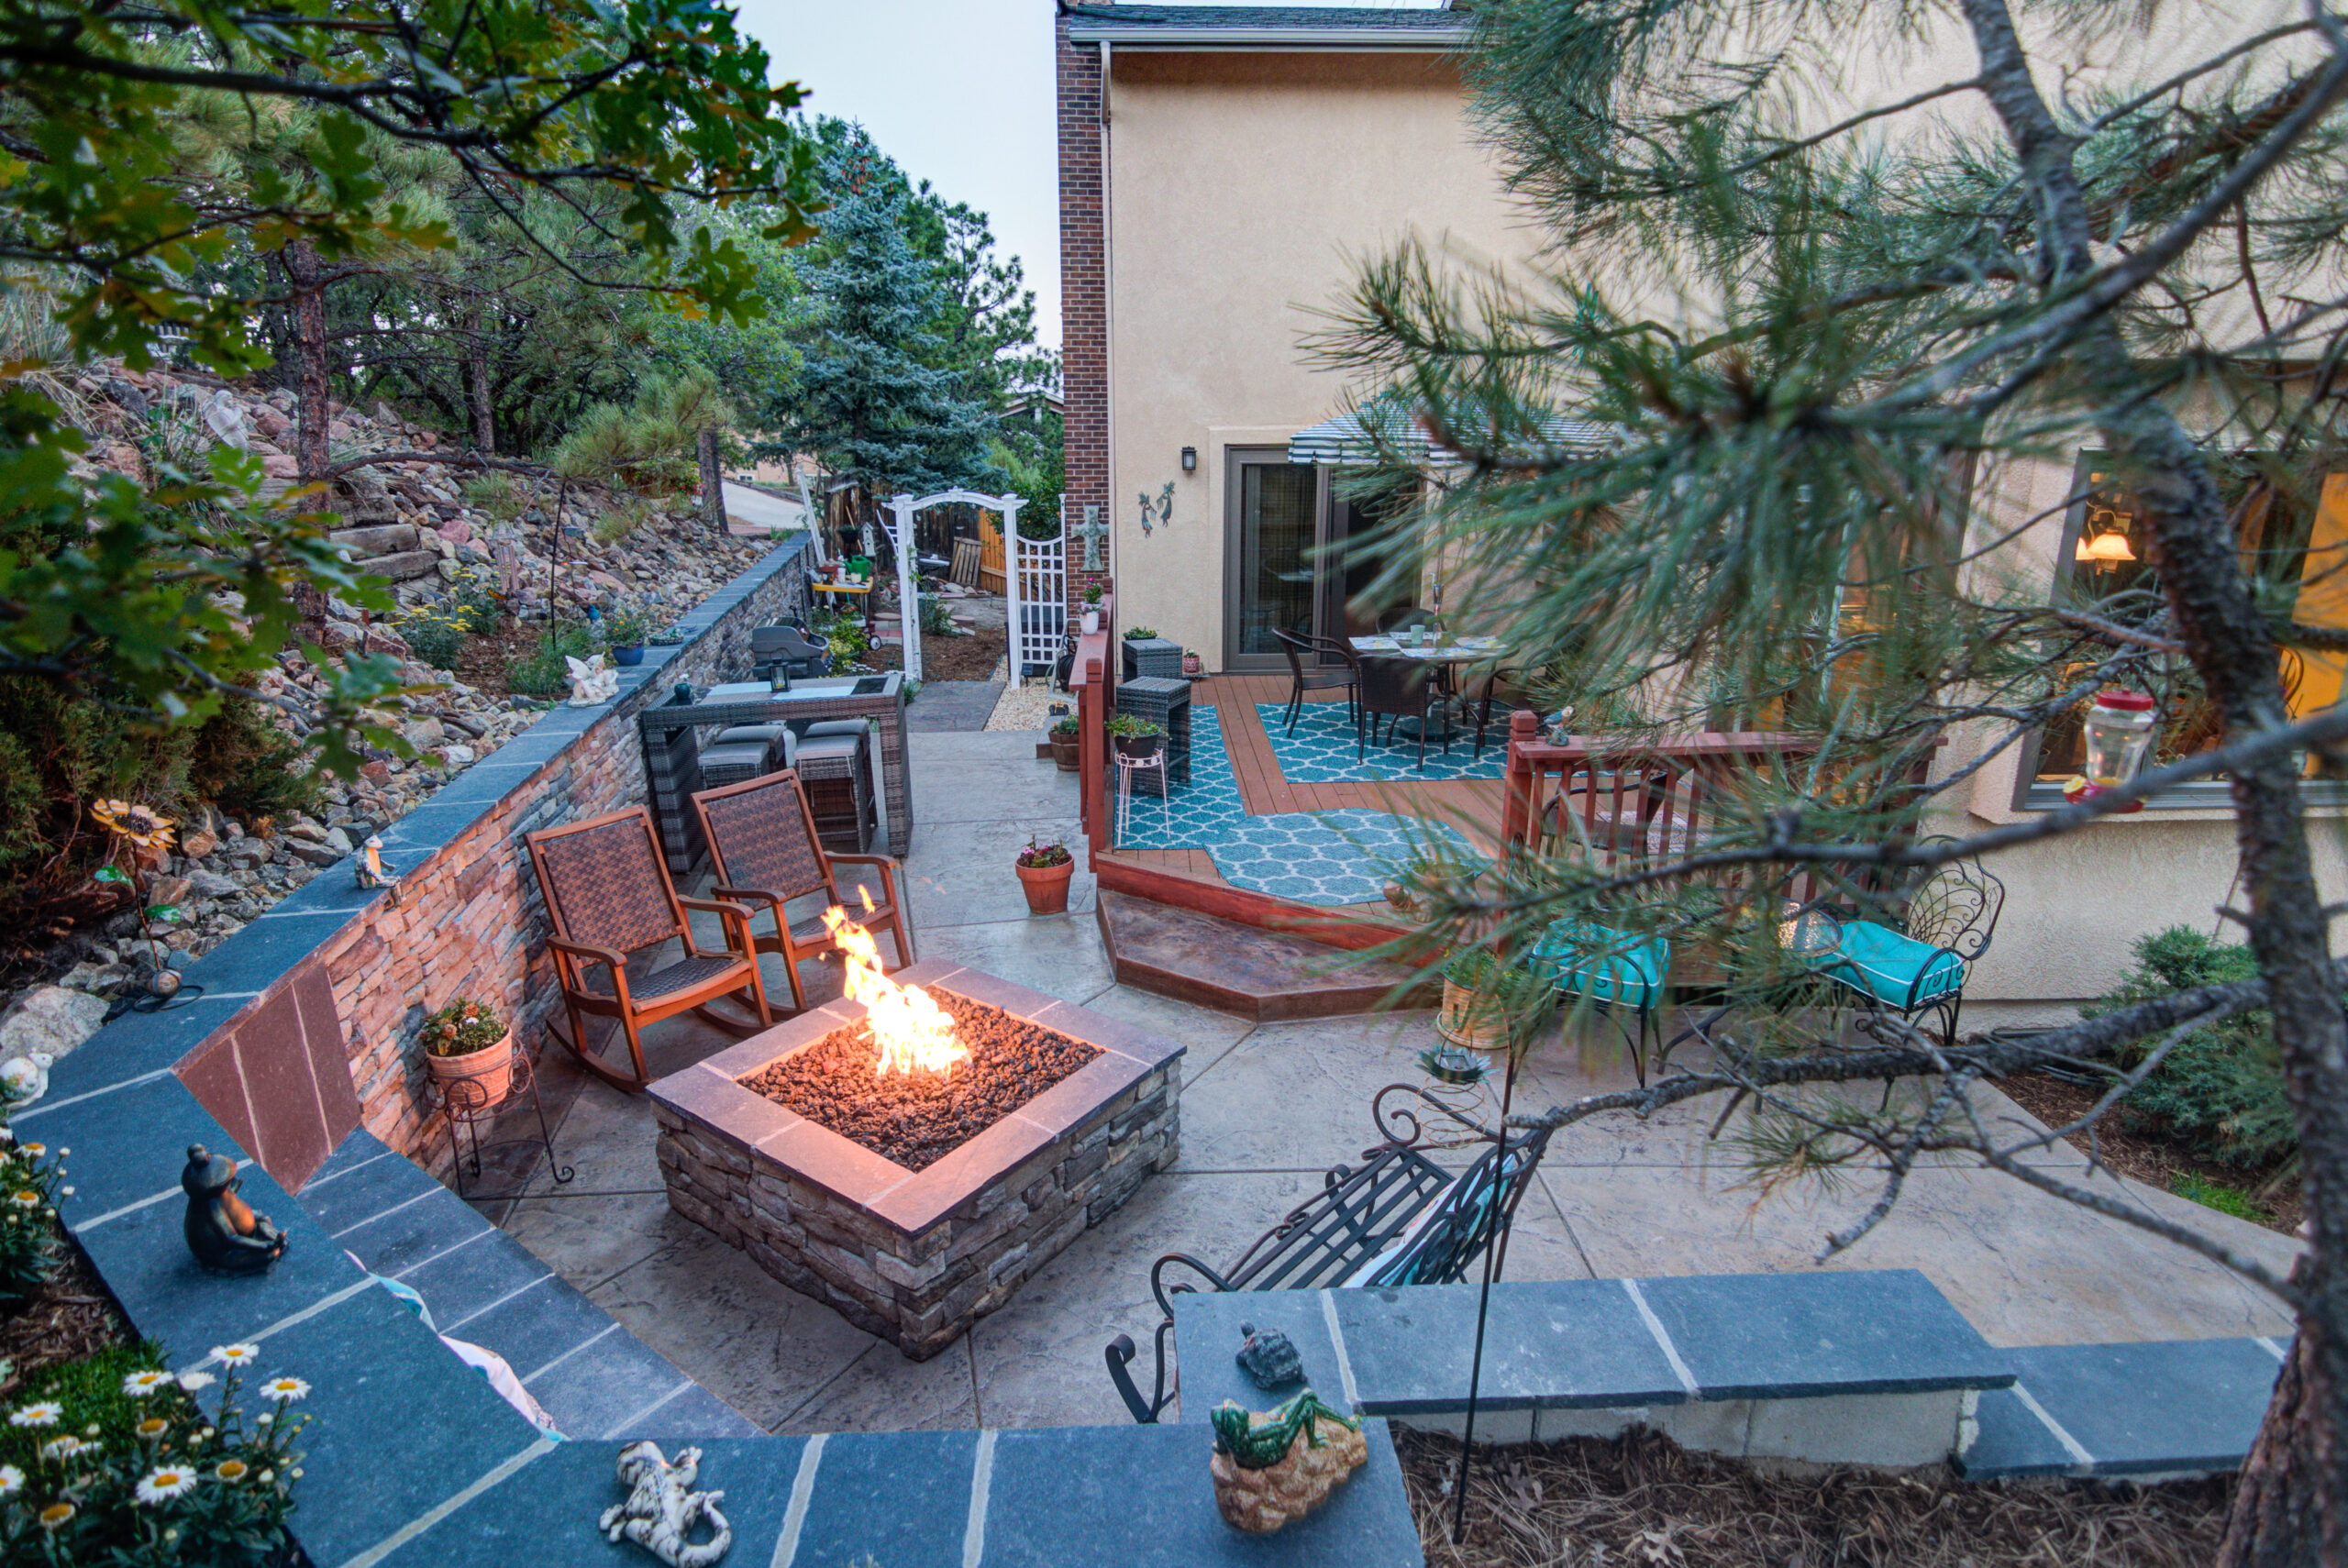 Backyard Bliss: Deck Installation with Built-In Seating and Fire Pit